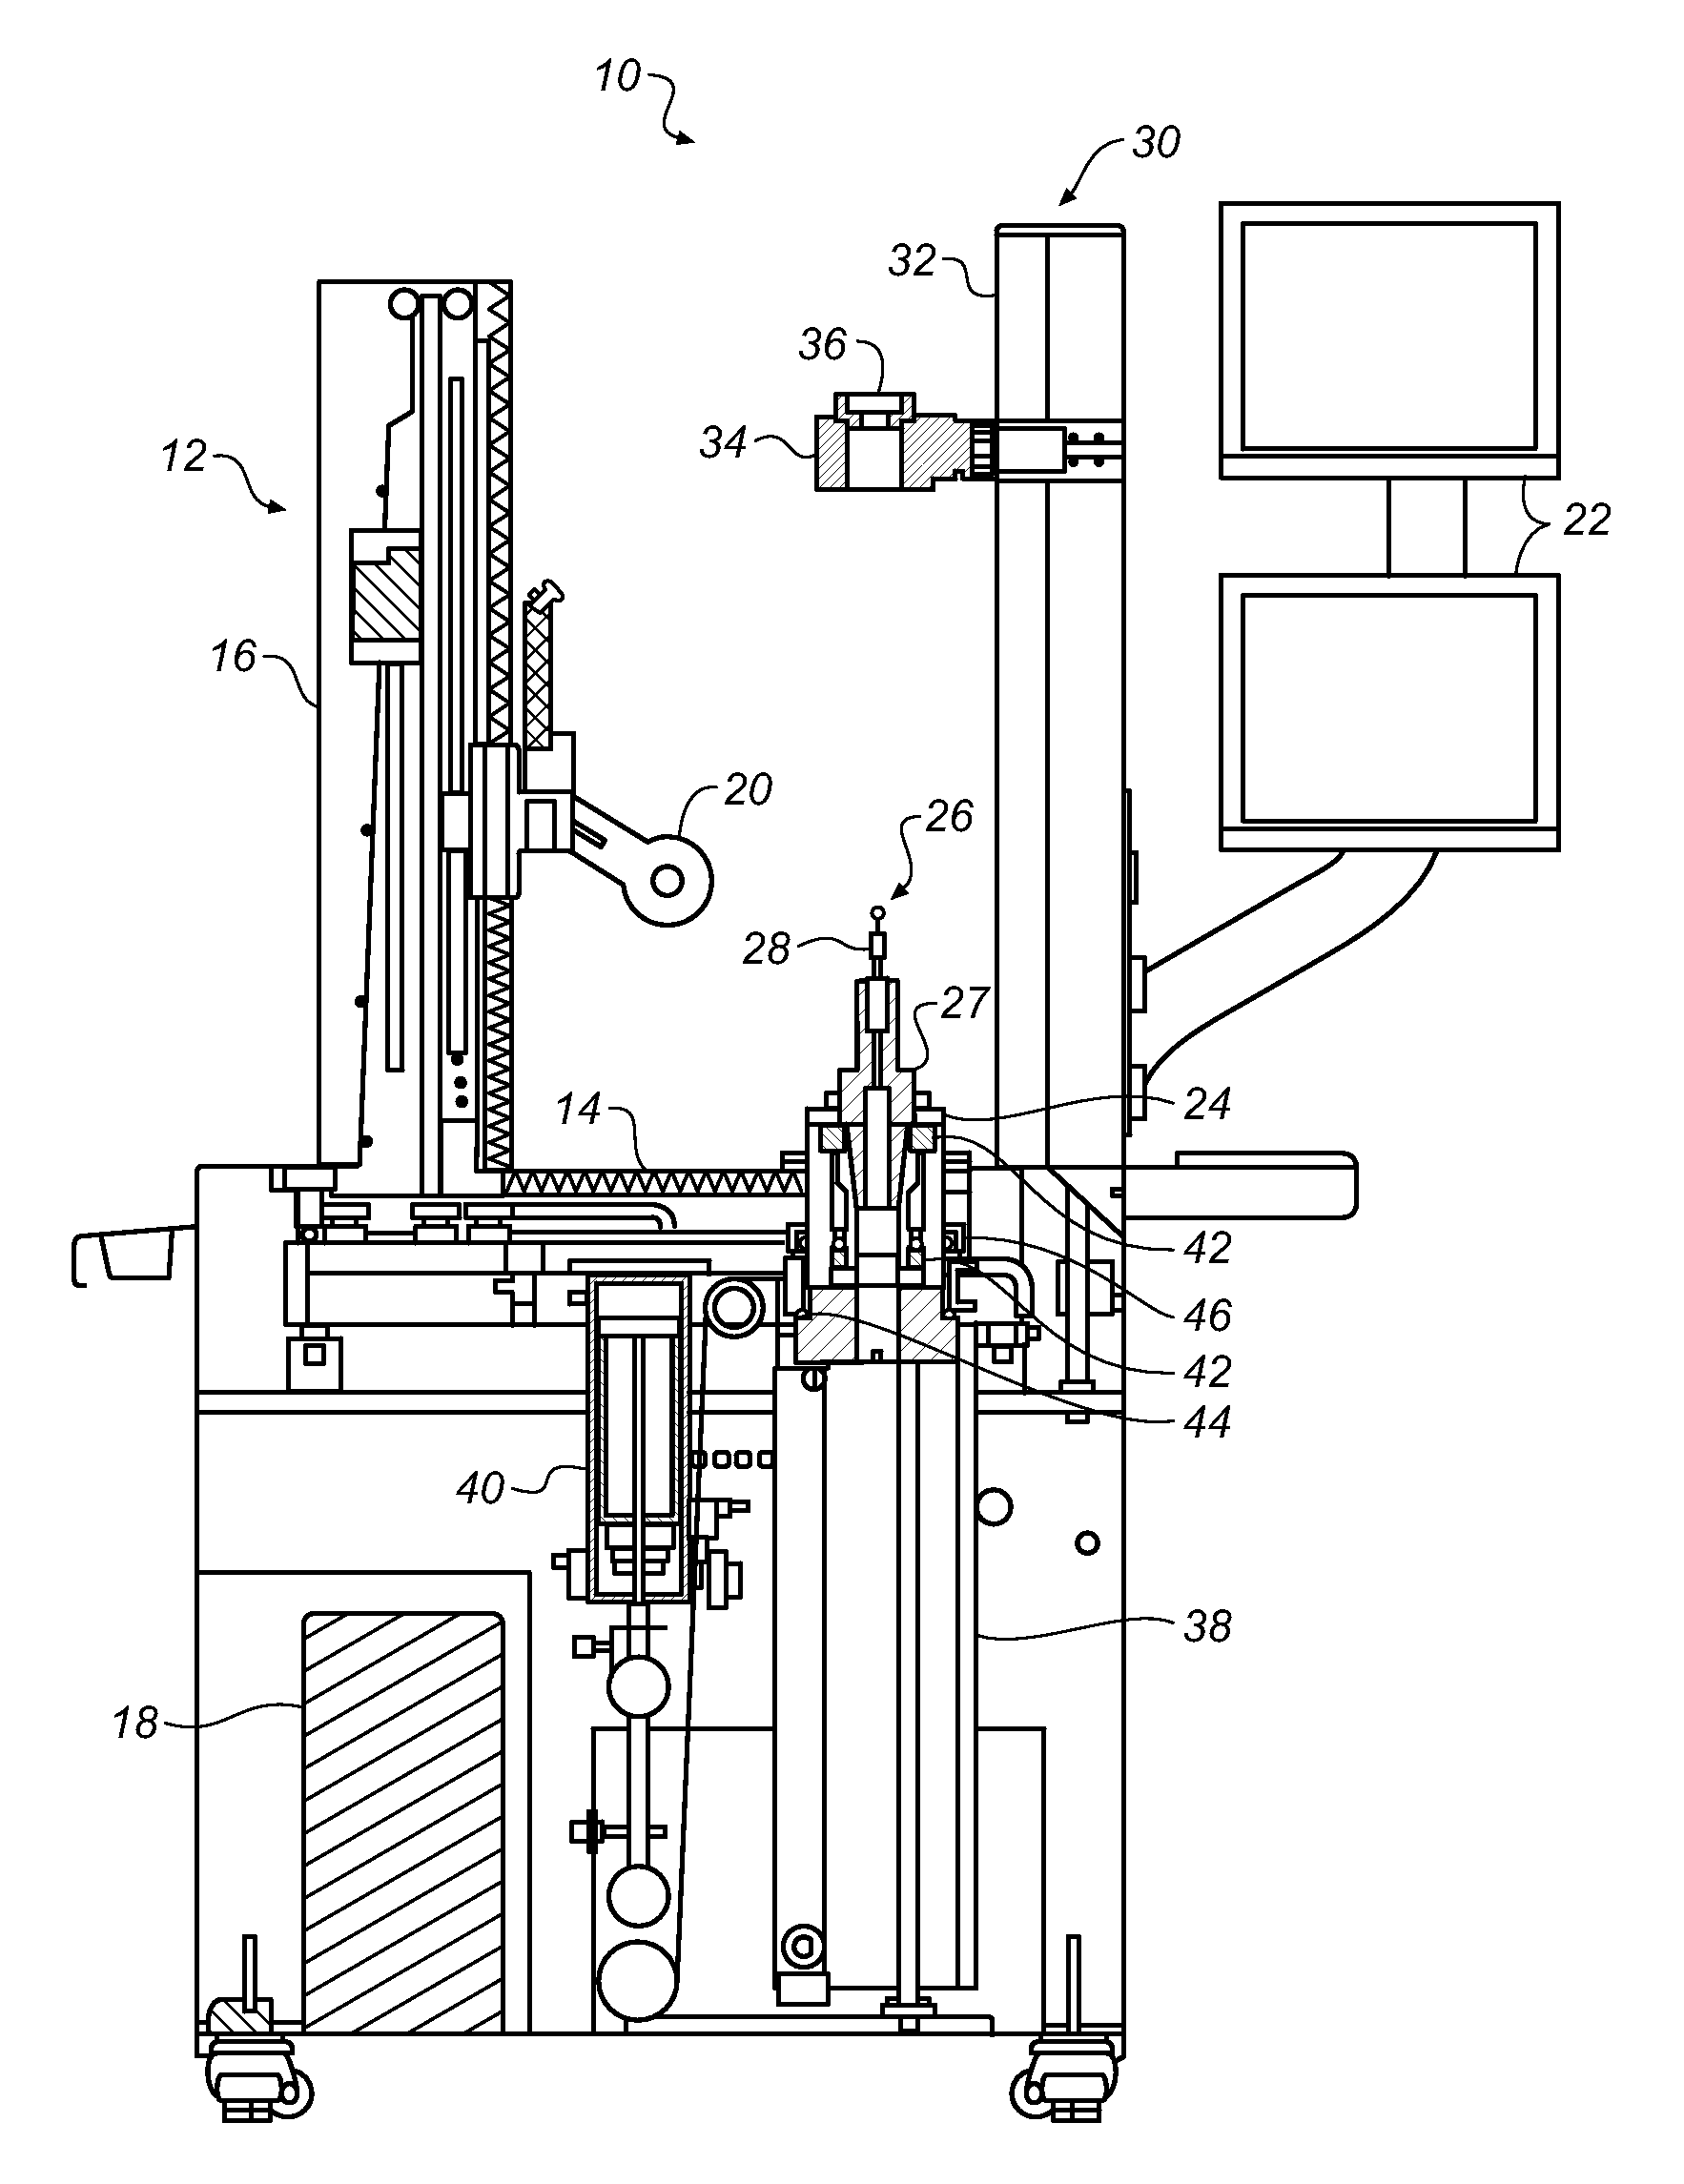 Combination tool presetter and induction heat-shrink apparatus